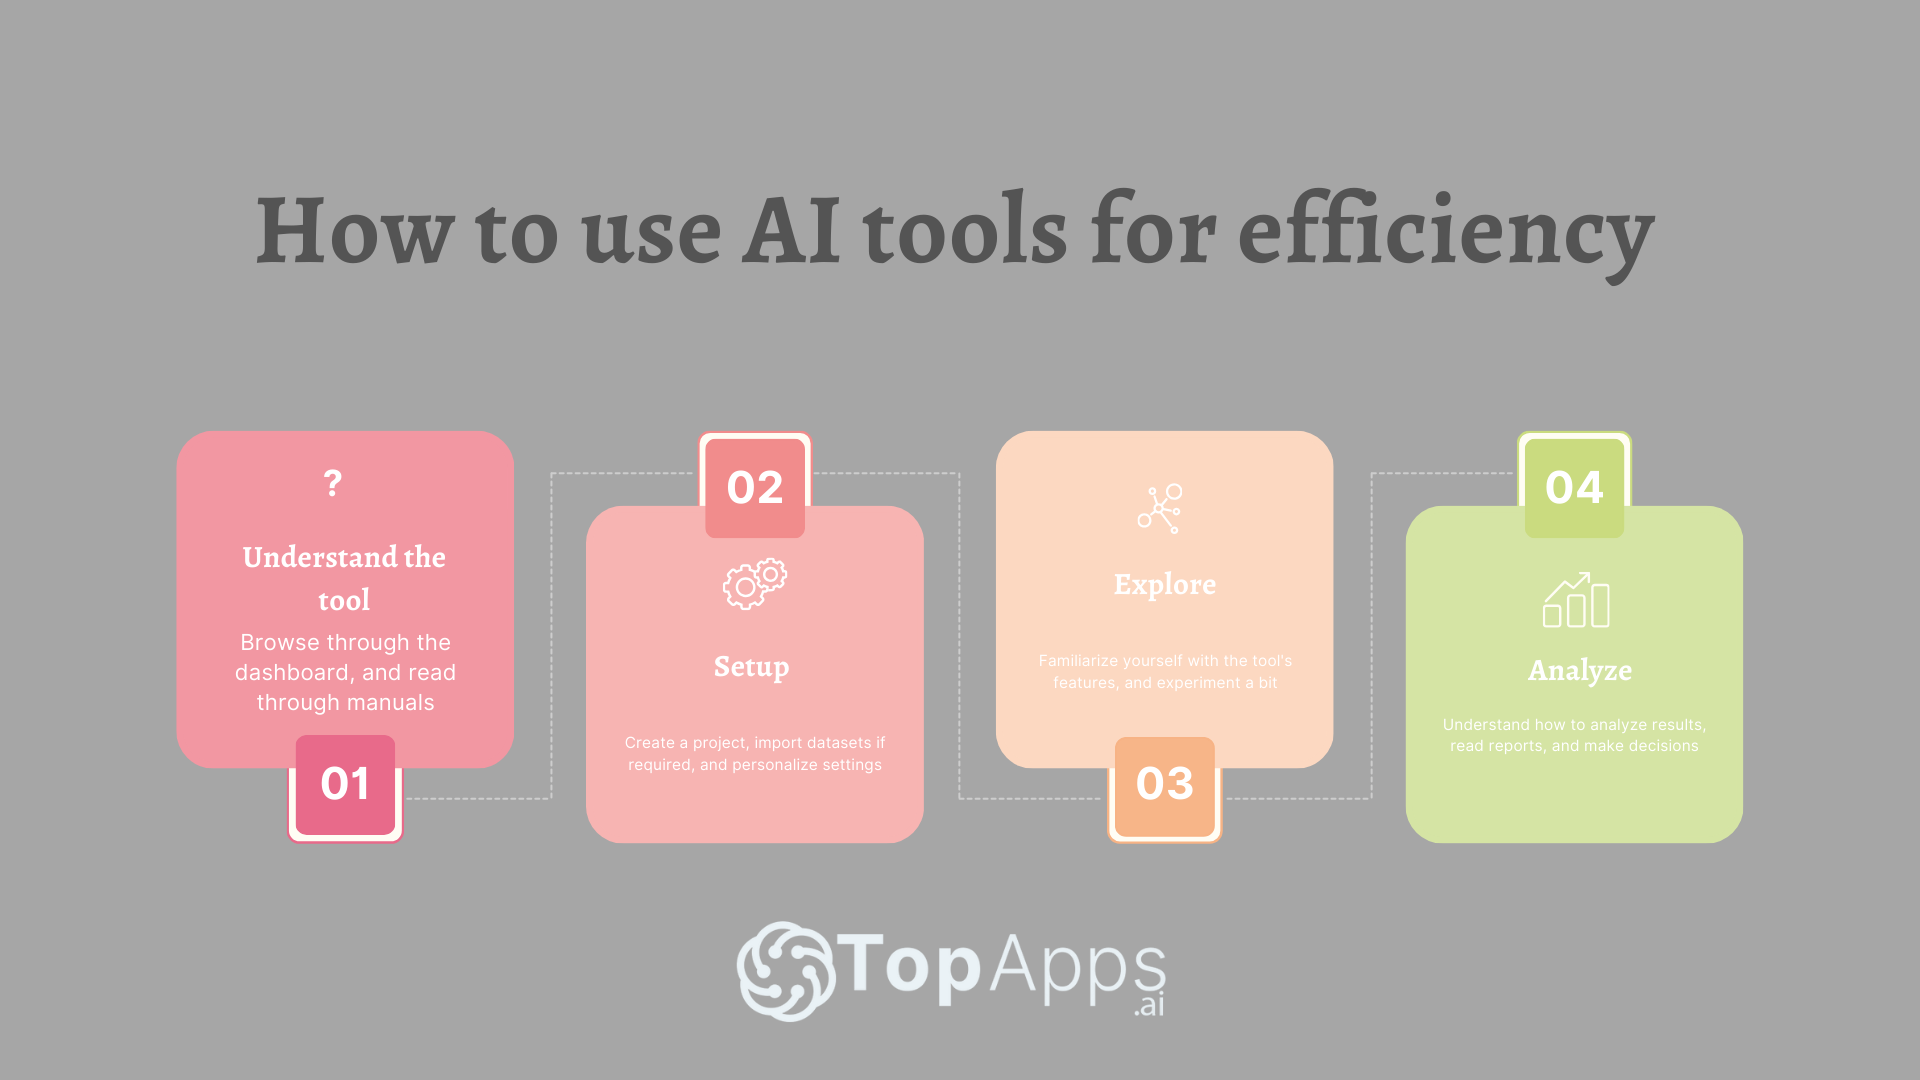 How to use AI tools for efficiency.